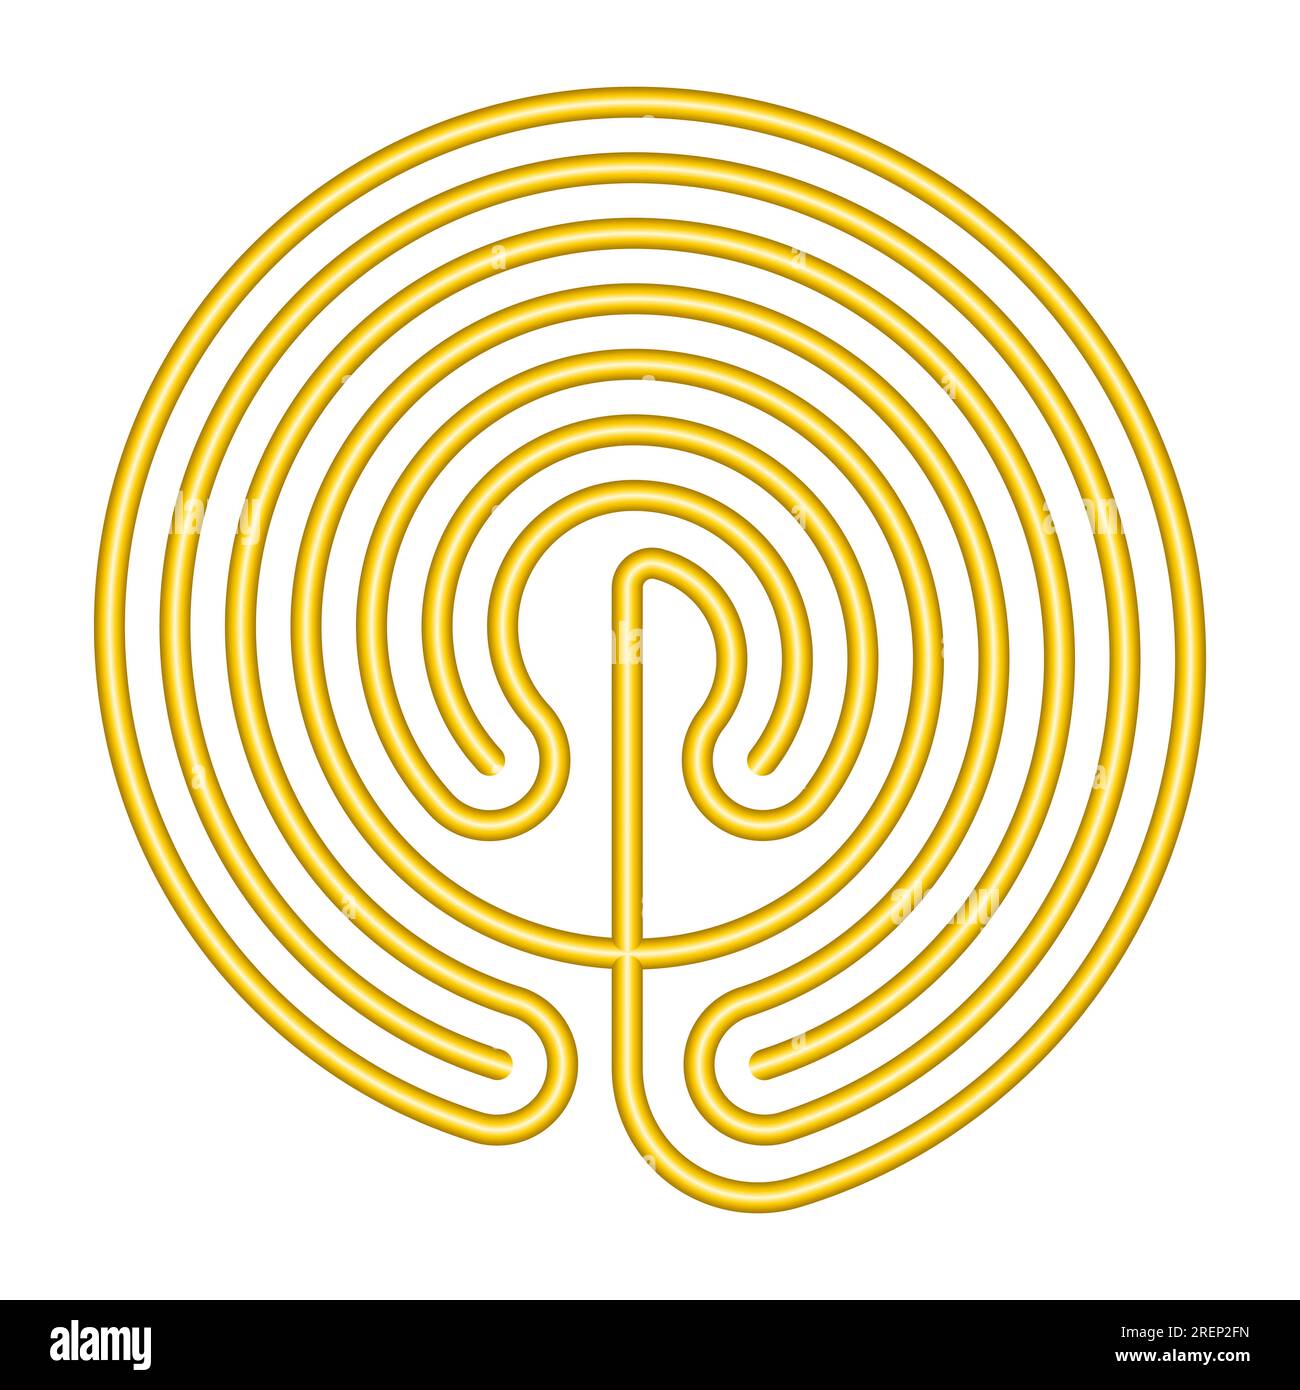 Circle shaped Cretan labyrinth, gold colored and in the classical design of a single path in 7 courses as depicted on coins from Knossos. Stock Photo